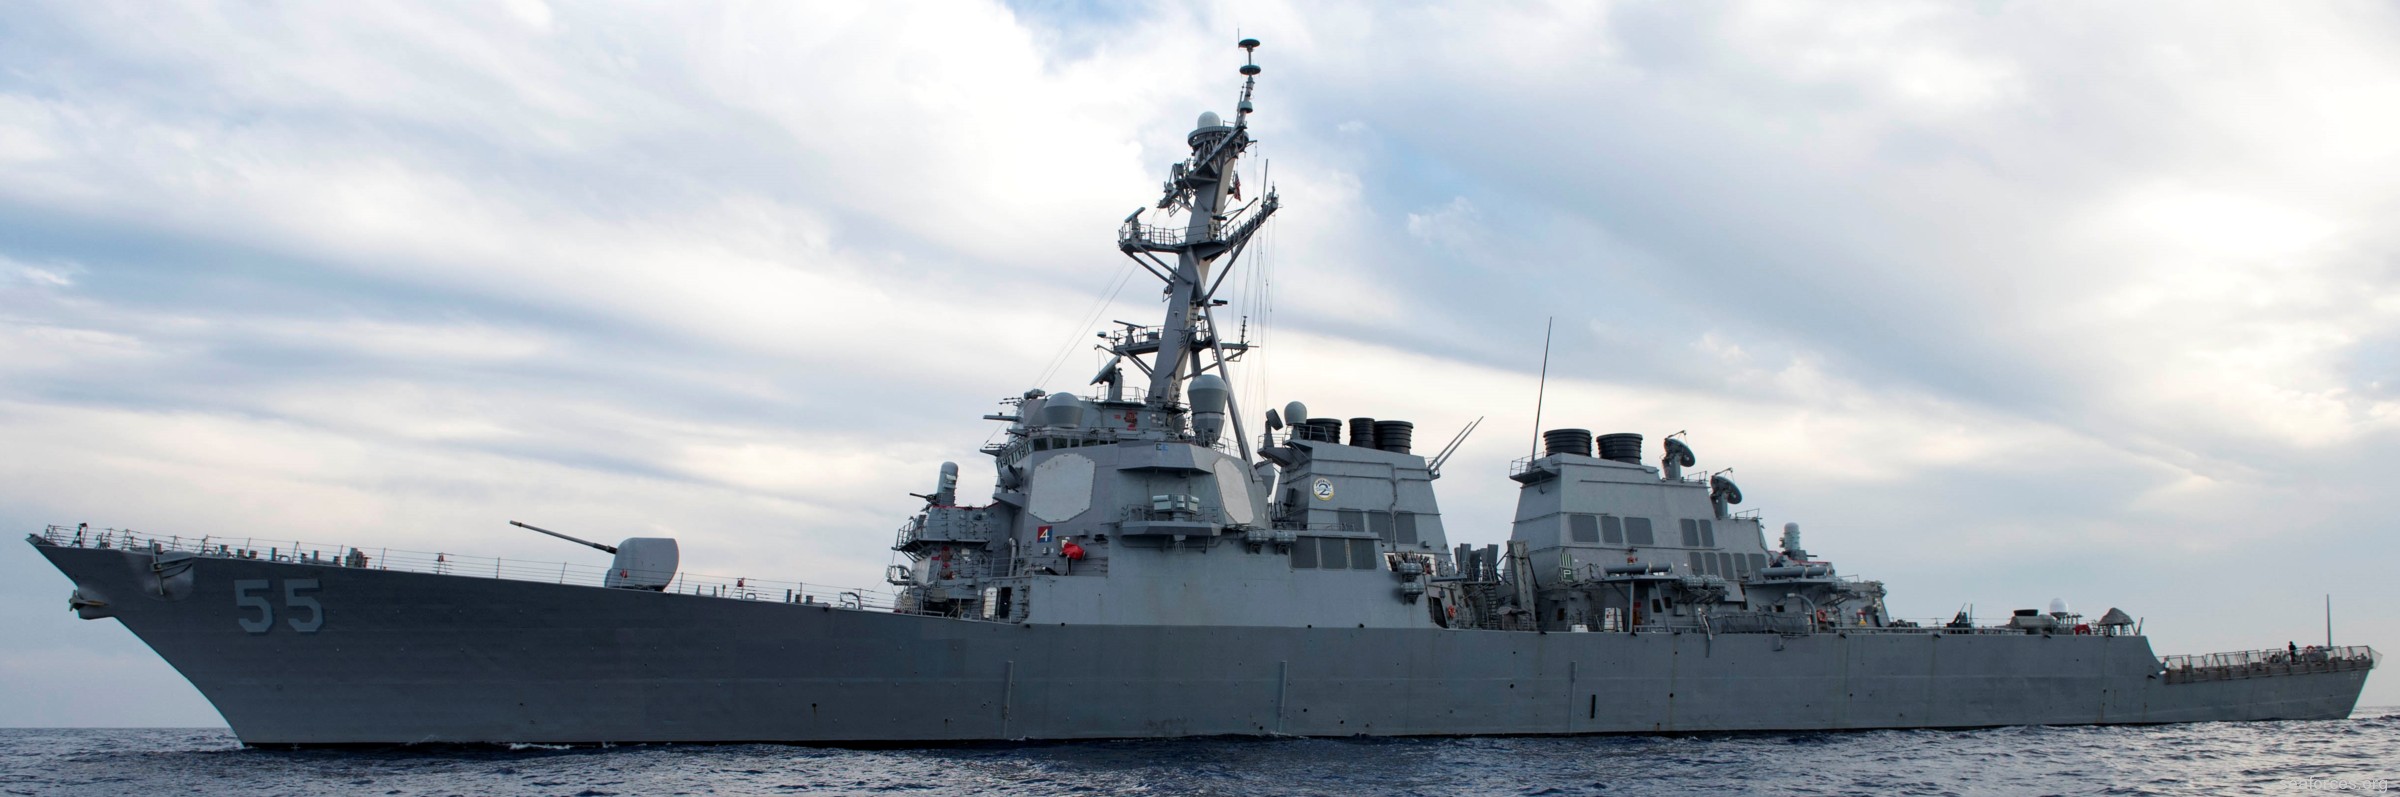 ddg-55 uss stout guided missile destroyer us navy 44